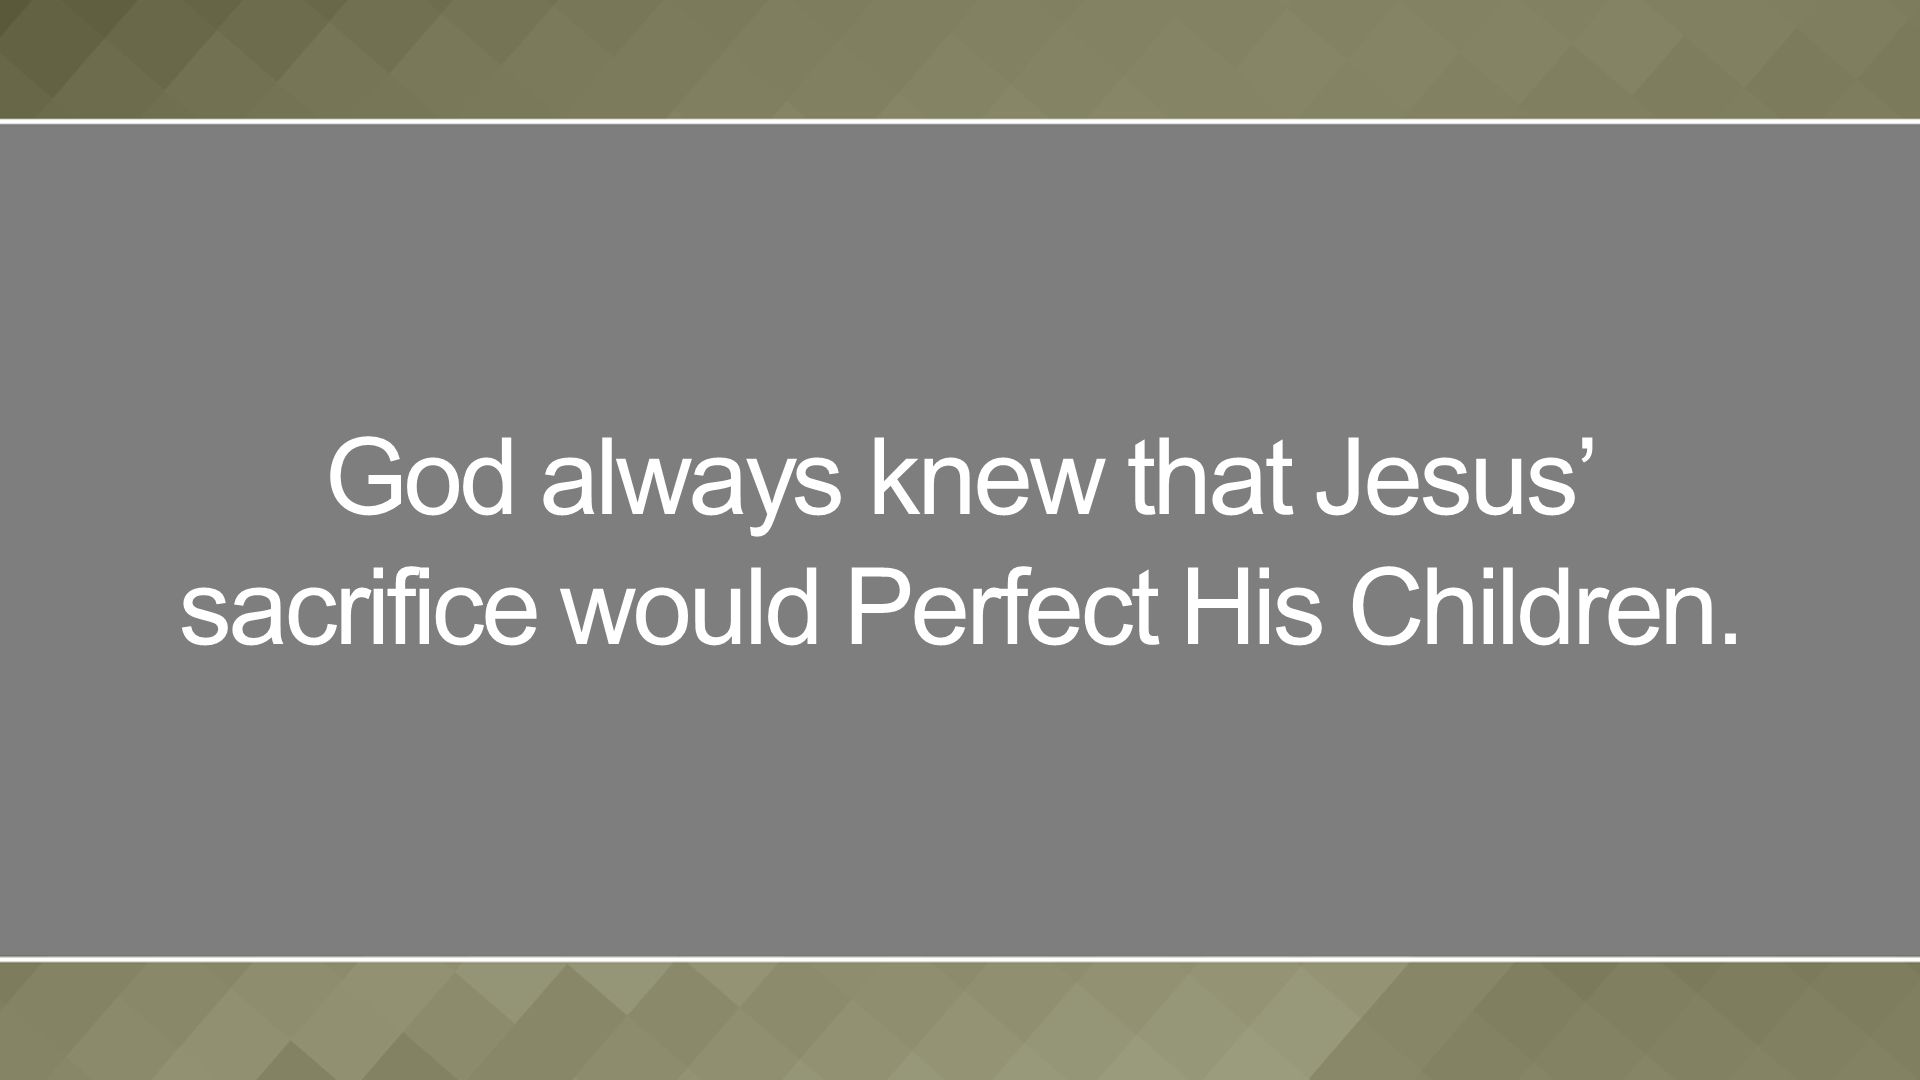 God always knew that Jesus’ sacrifice would Perfect His Children.